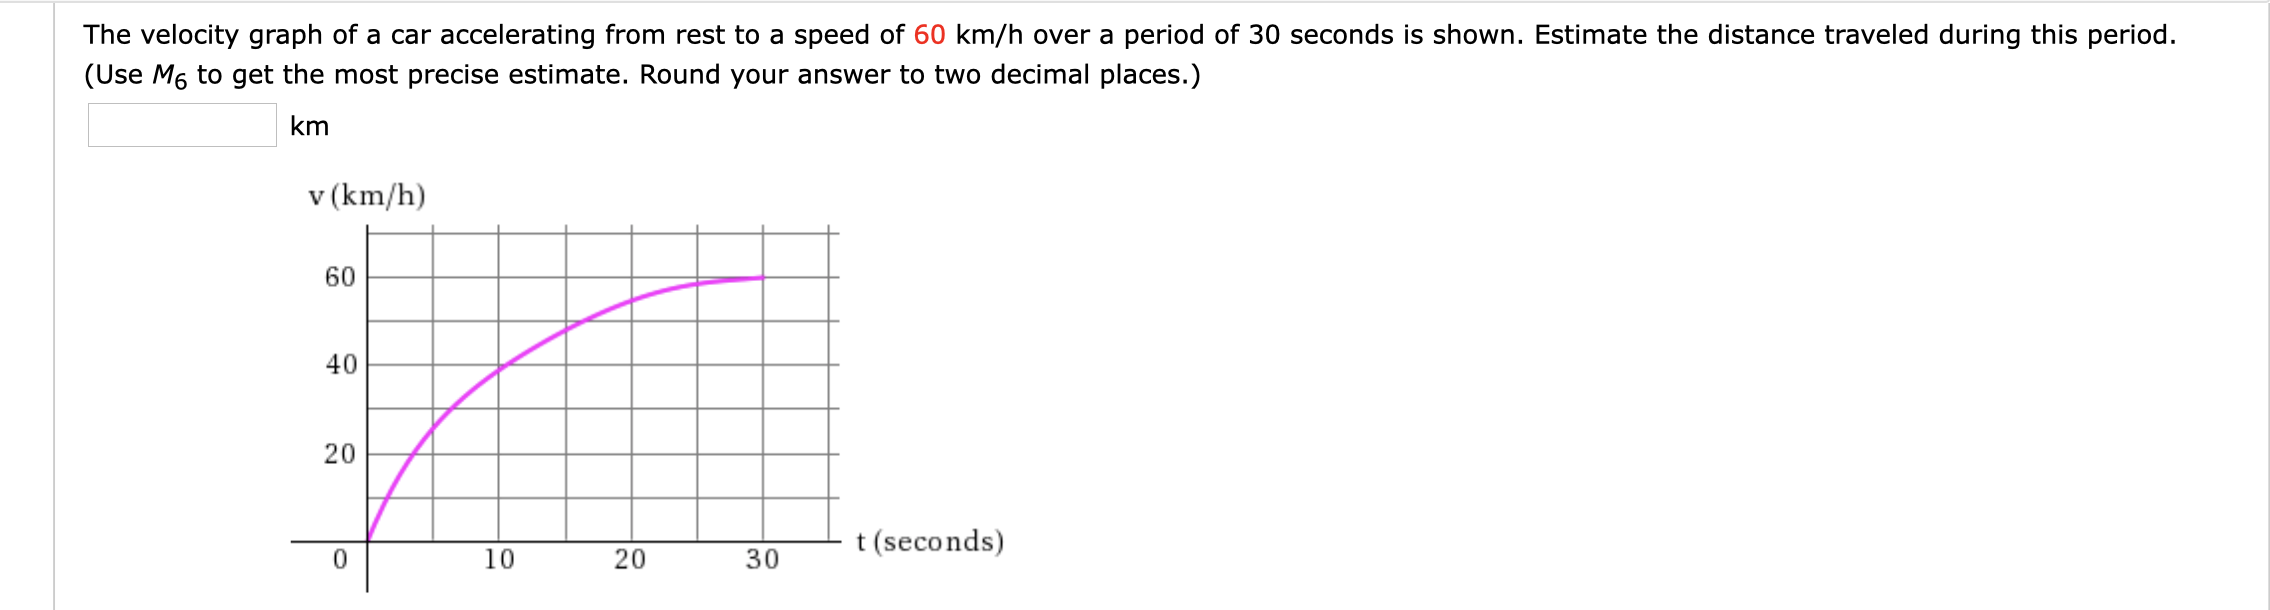 The velocity graph of a car accelerating from rest to a speed of 60 km/h over a period of 30 seconds is shown. Estimate the distance traveled during this period.
(Use M6 to get the most precise estimate. Round your answer to two decimal places.)
km
v (km/h)
60
40
20
t(seconds)
0
10
30
20
